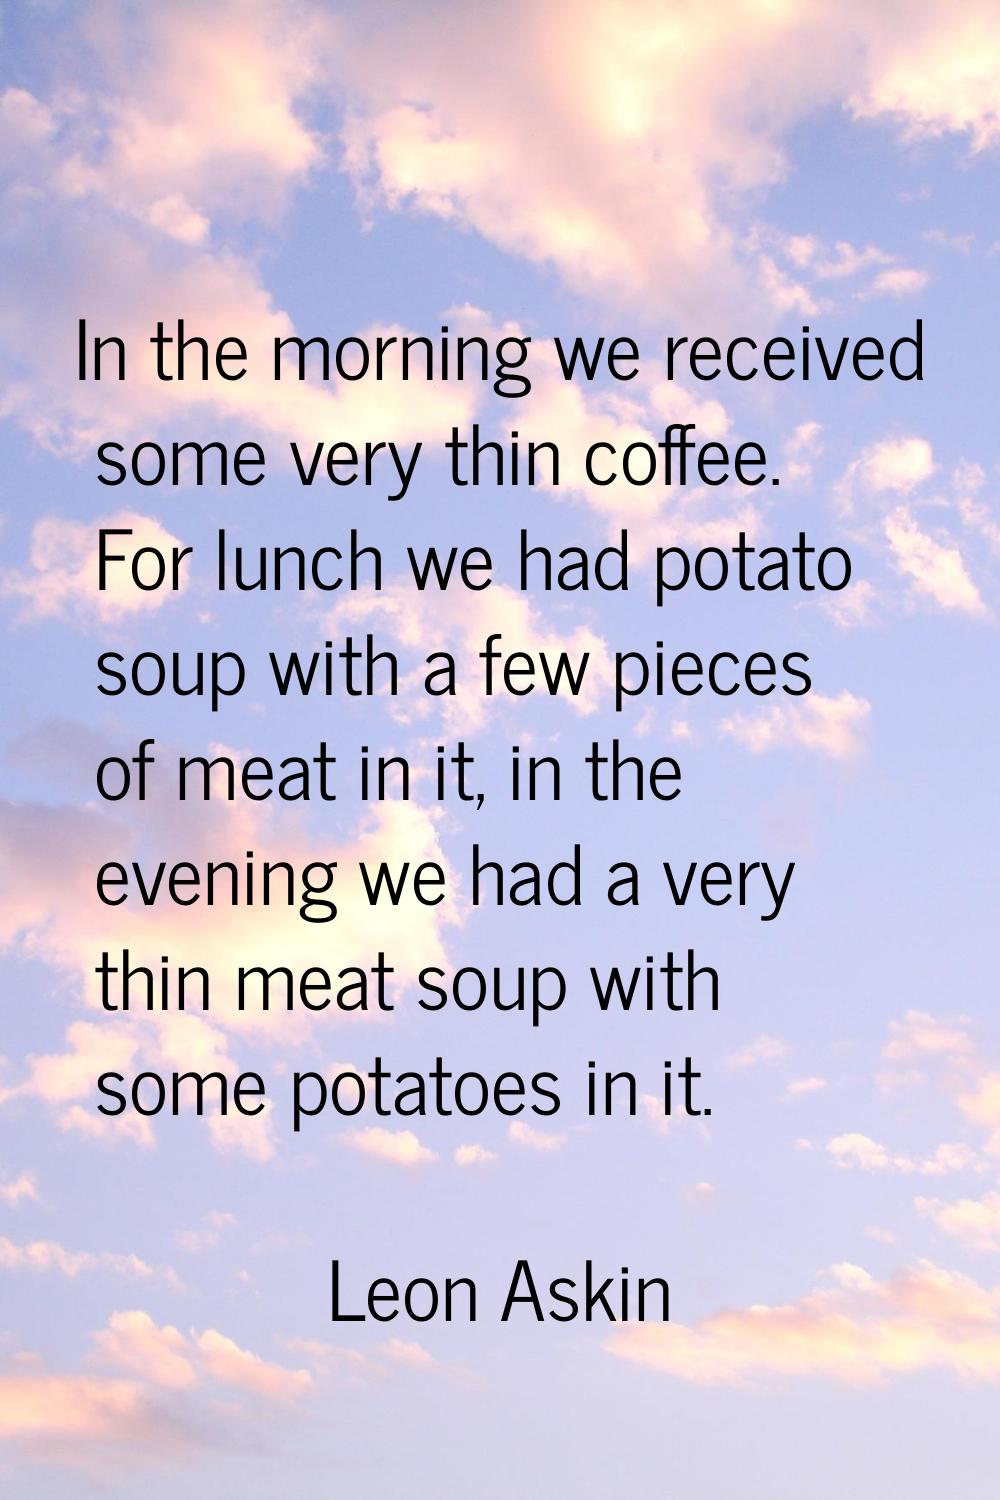 In the morning we received some very thin coffee. For lunch we had potato soup with a few pieces of